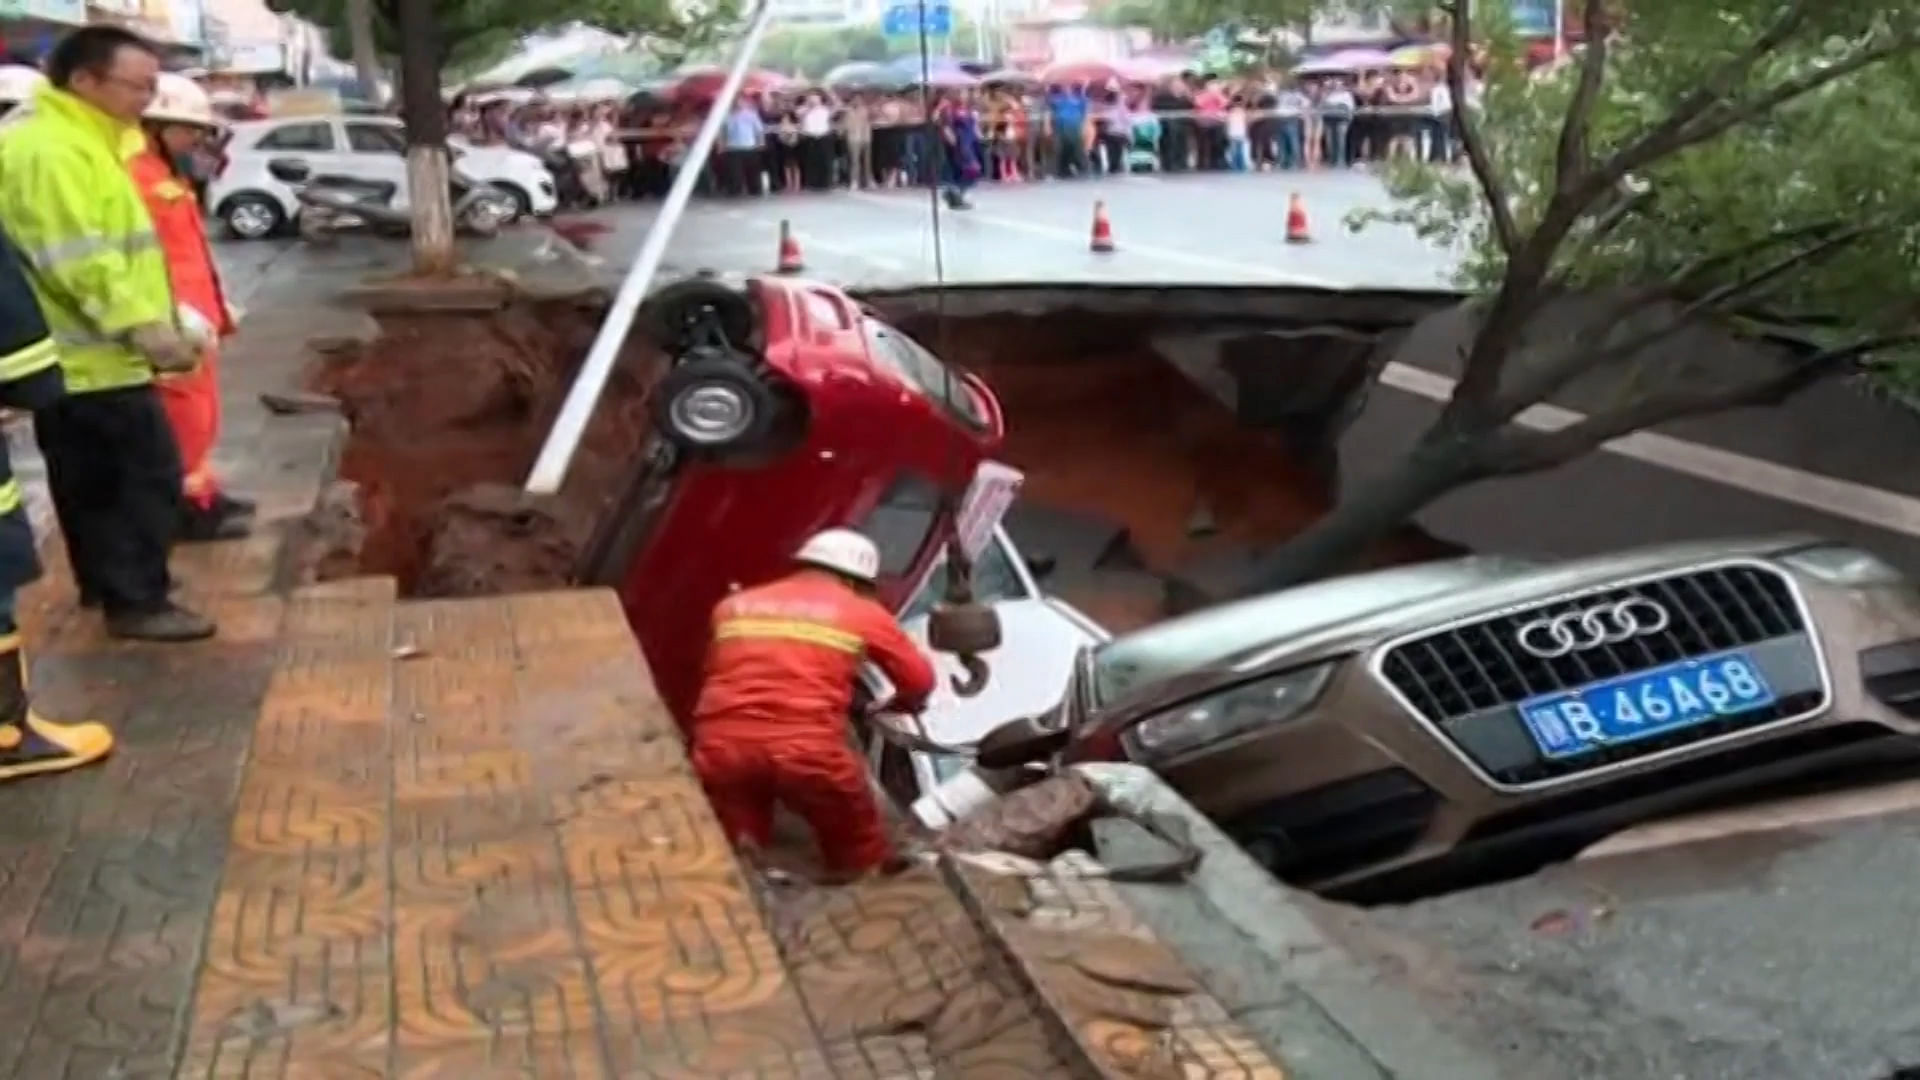 A CCTV footage from China captured a sinkhole emerging in the middle of the road. (Photo: AP/Newsflare screengrab)